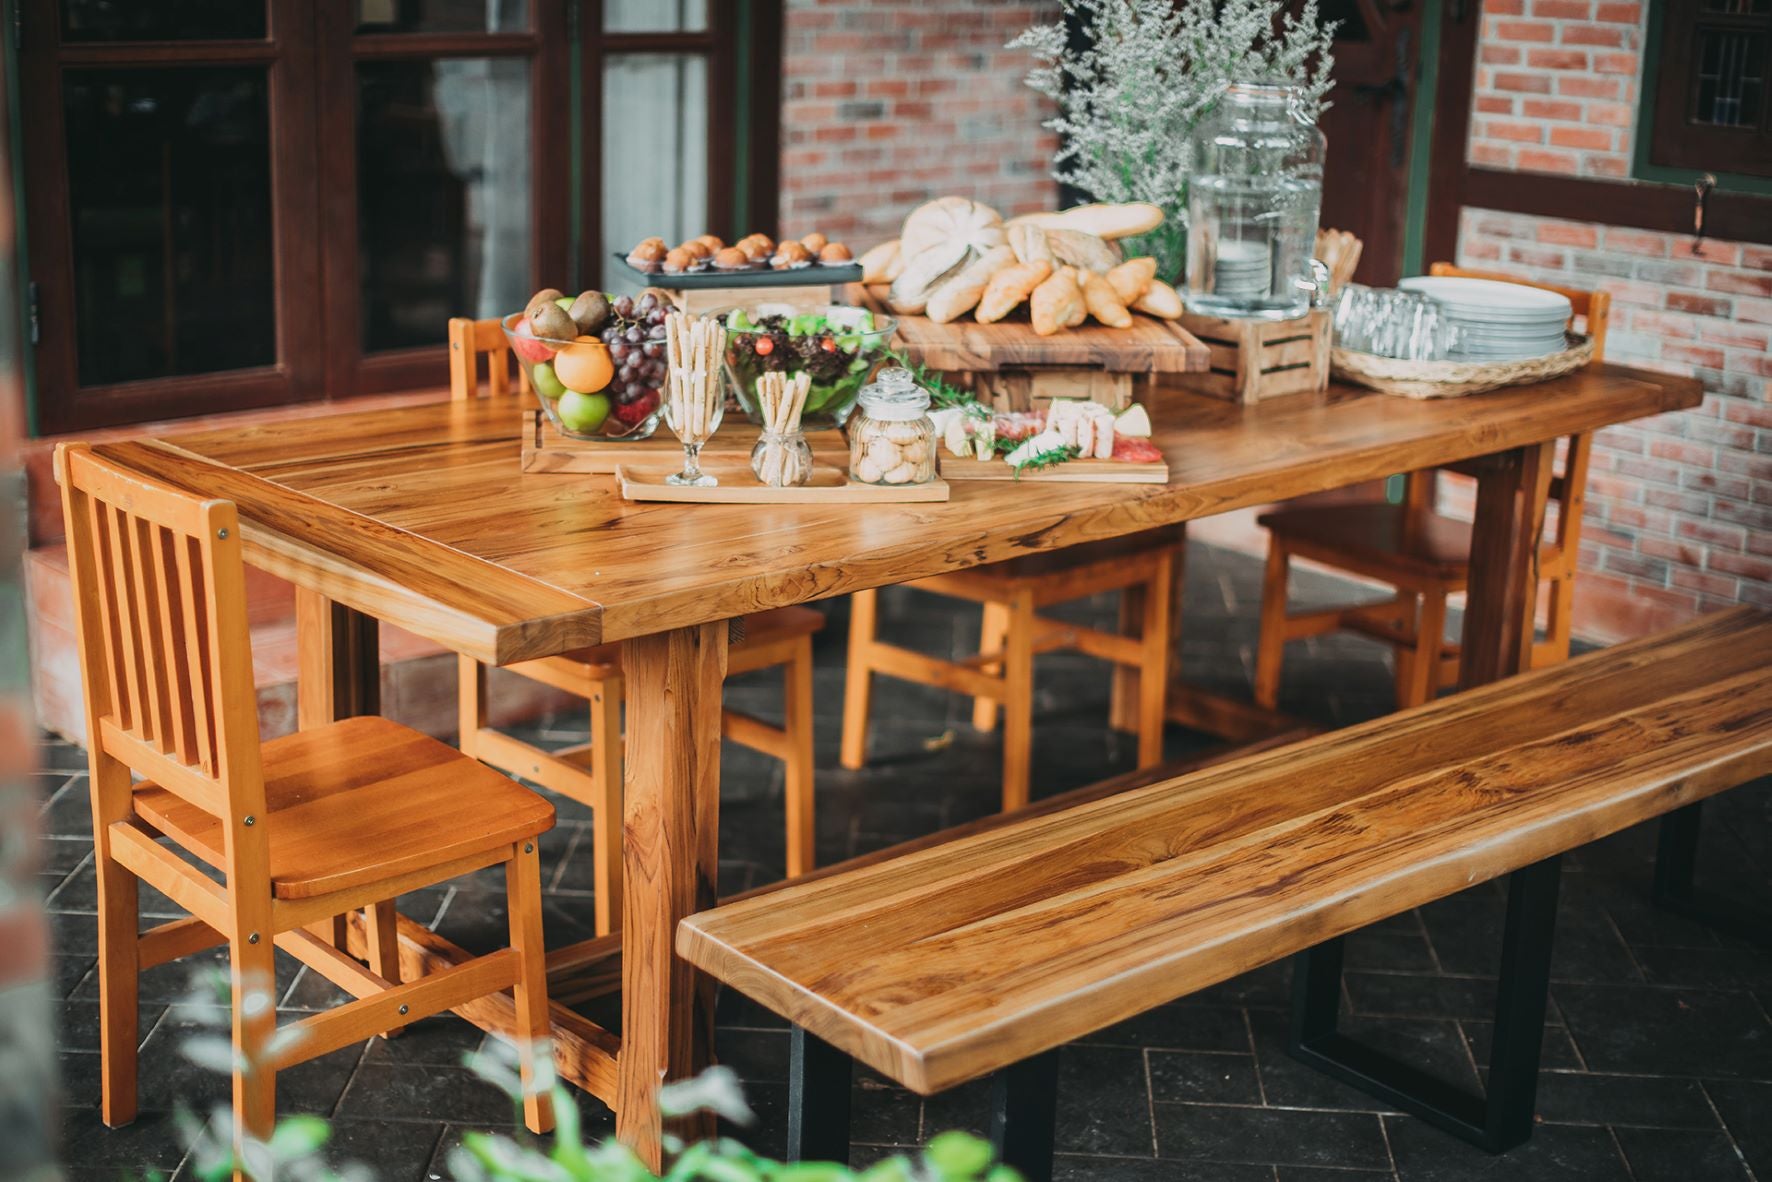 This beautiful 96x40 solid Burmese teak dining table is beautifully finished in a smooth natural. The charm of the Alene table brings a modern sense of rural retreat into your home. Gorgeously crafted solid wood top crowns a wood beam base that